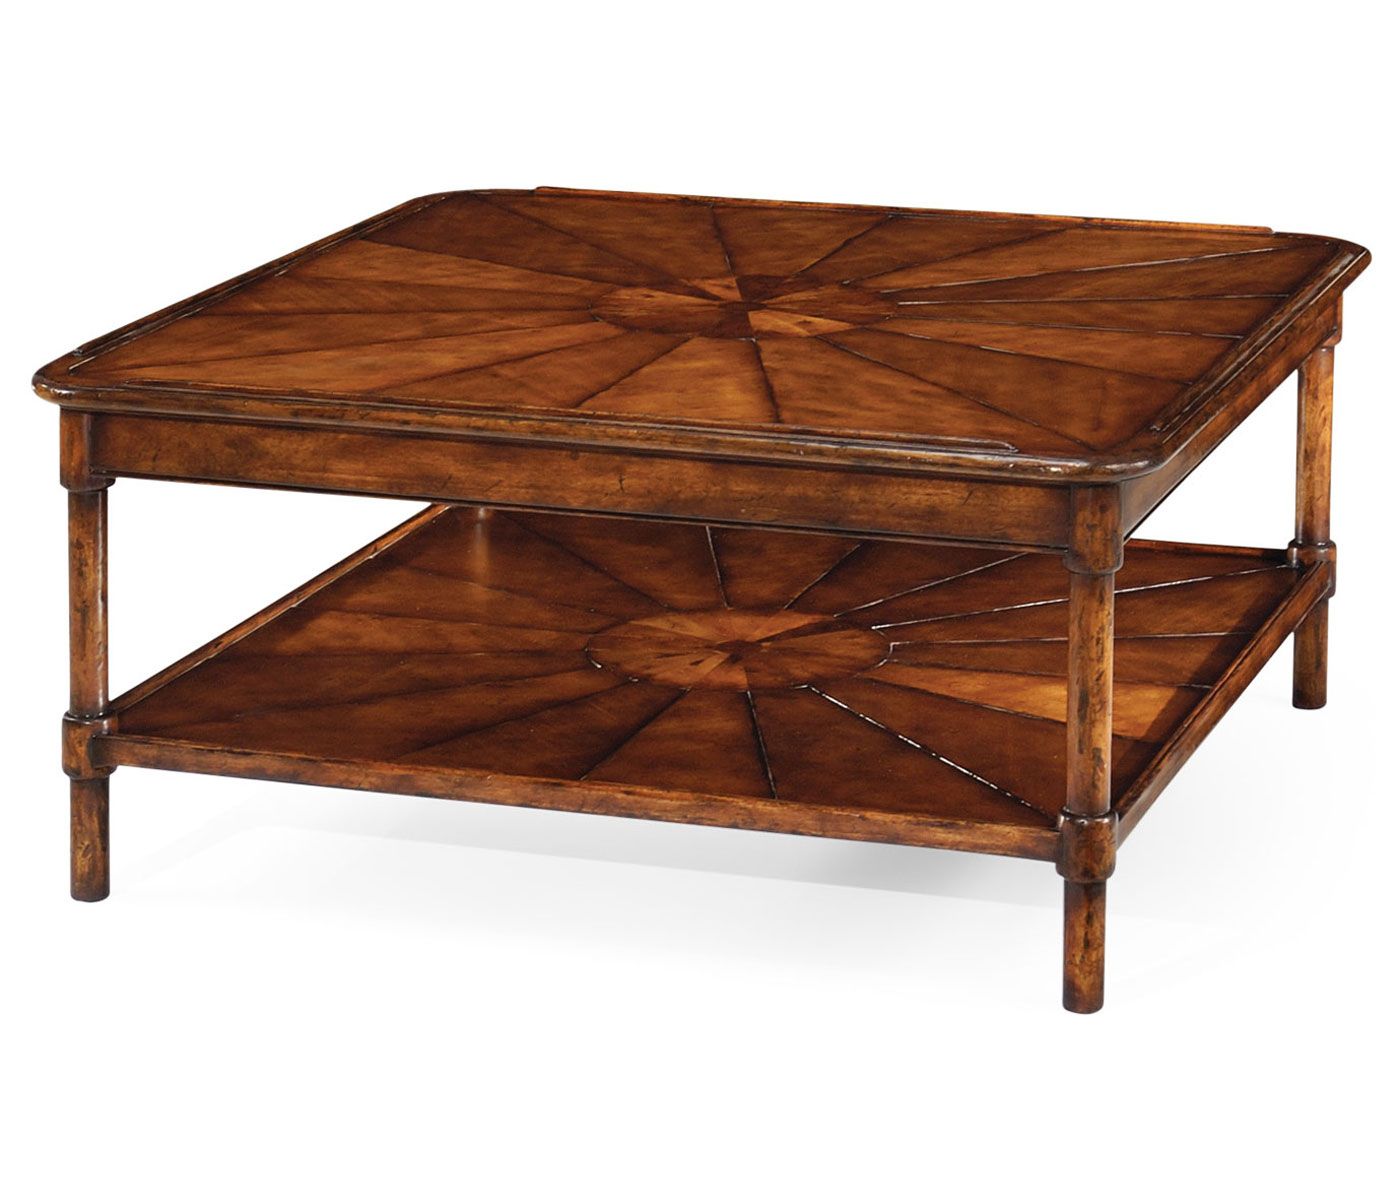 Square Rustic Walnut Coffee Table Pertaining To Most Recently Released Walnut Wood And Gold Metal Coffee Tables (View 9 of 20)